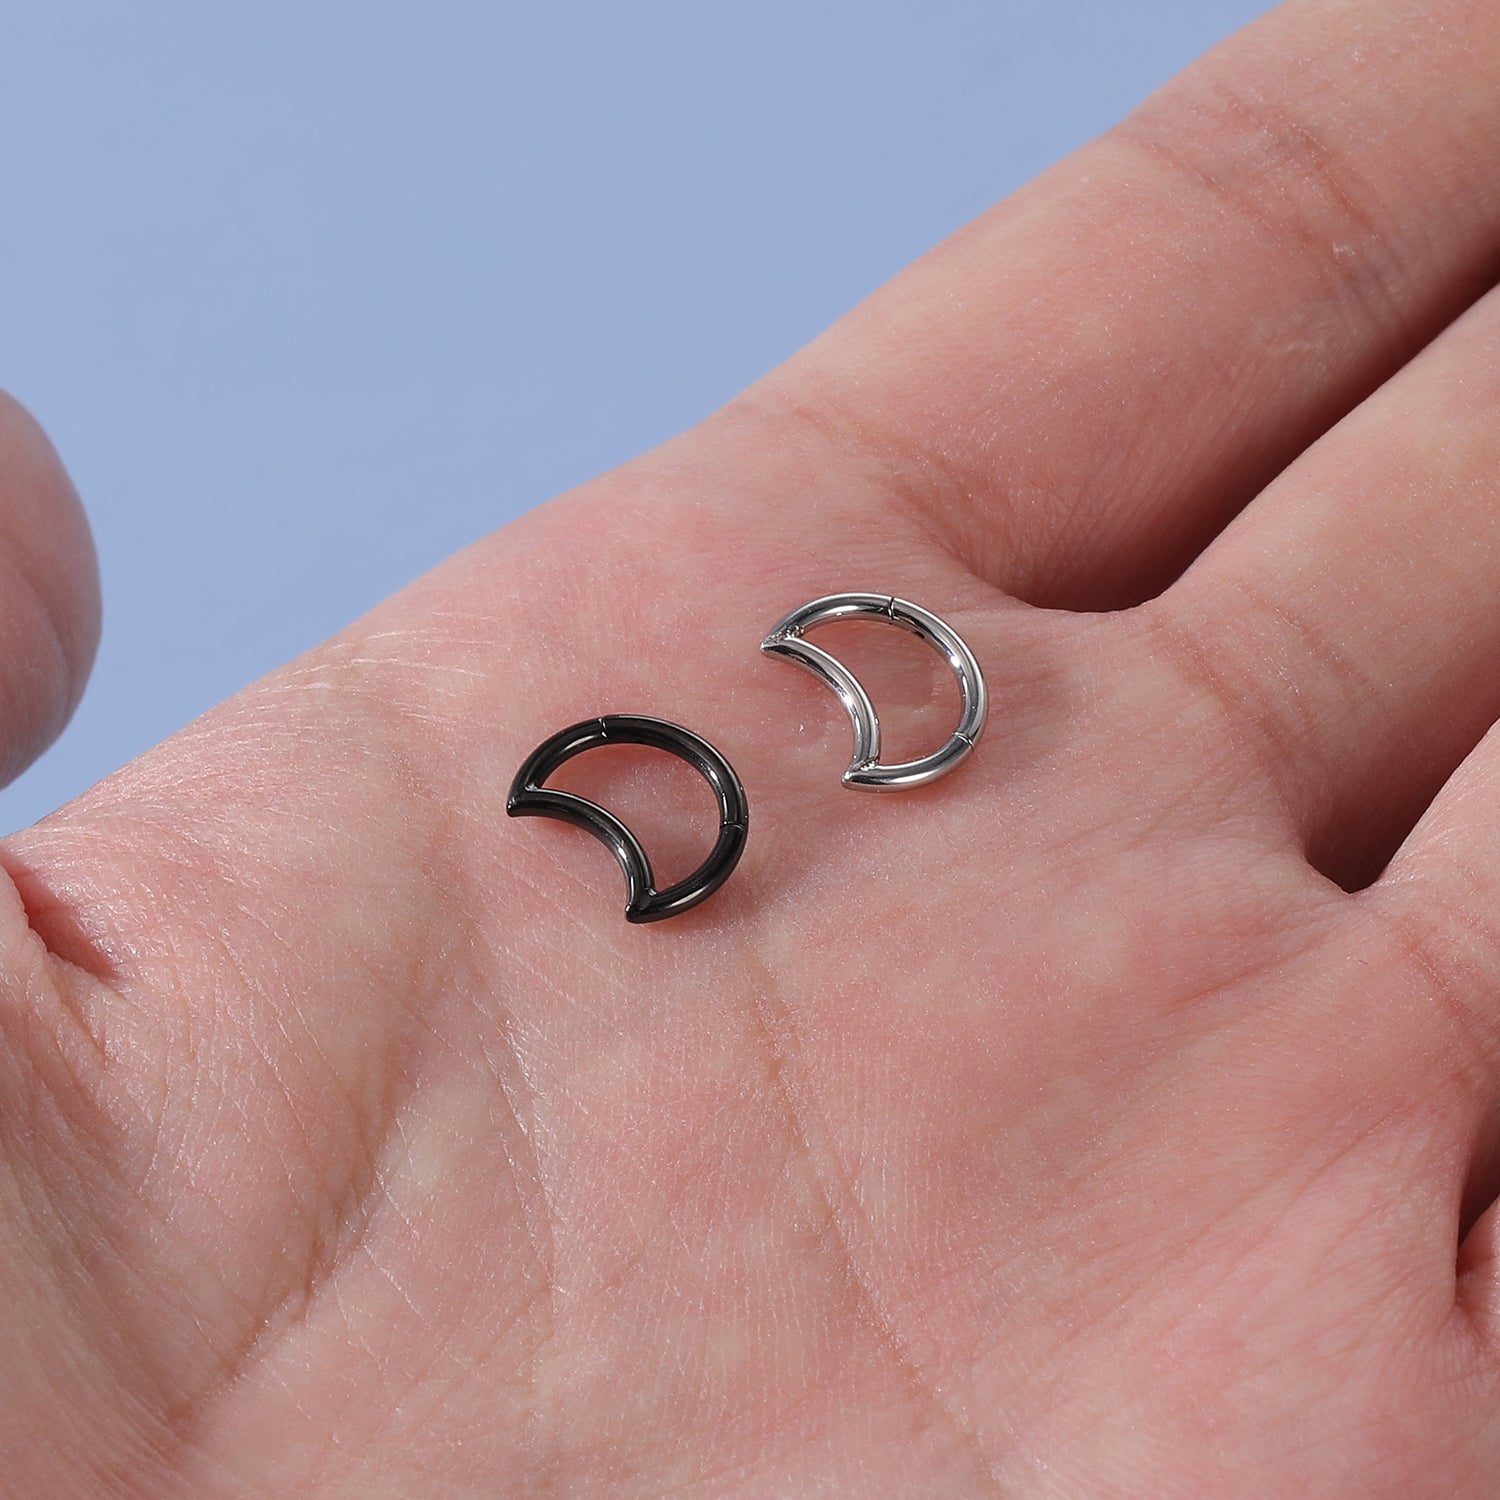 16g-moon-cute-nose-septum-ring-black-sliver-clicker-stainless-steel-helix-cartilage-piercing